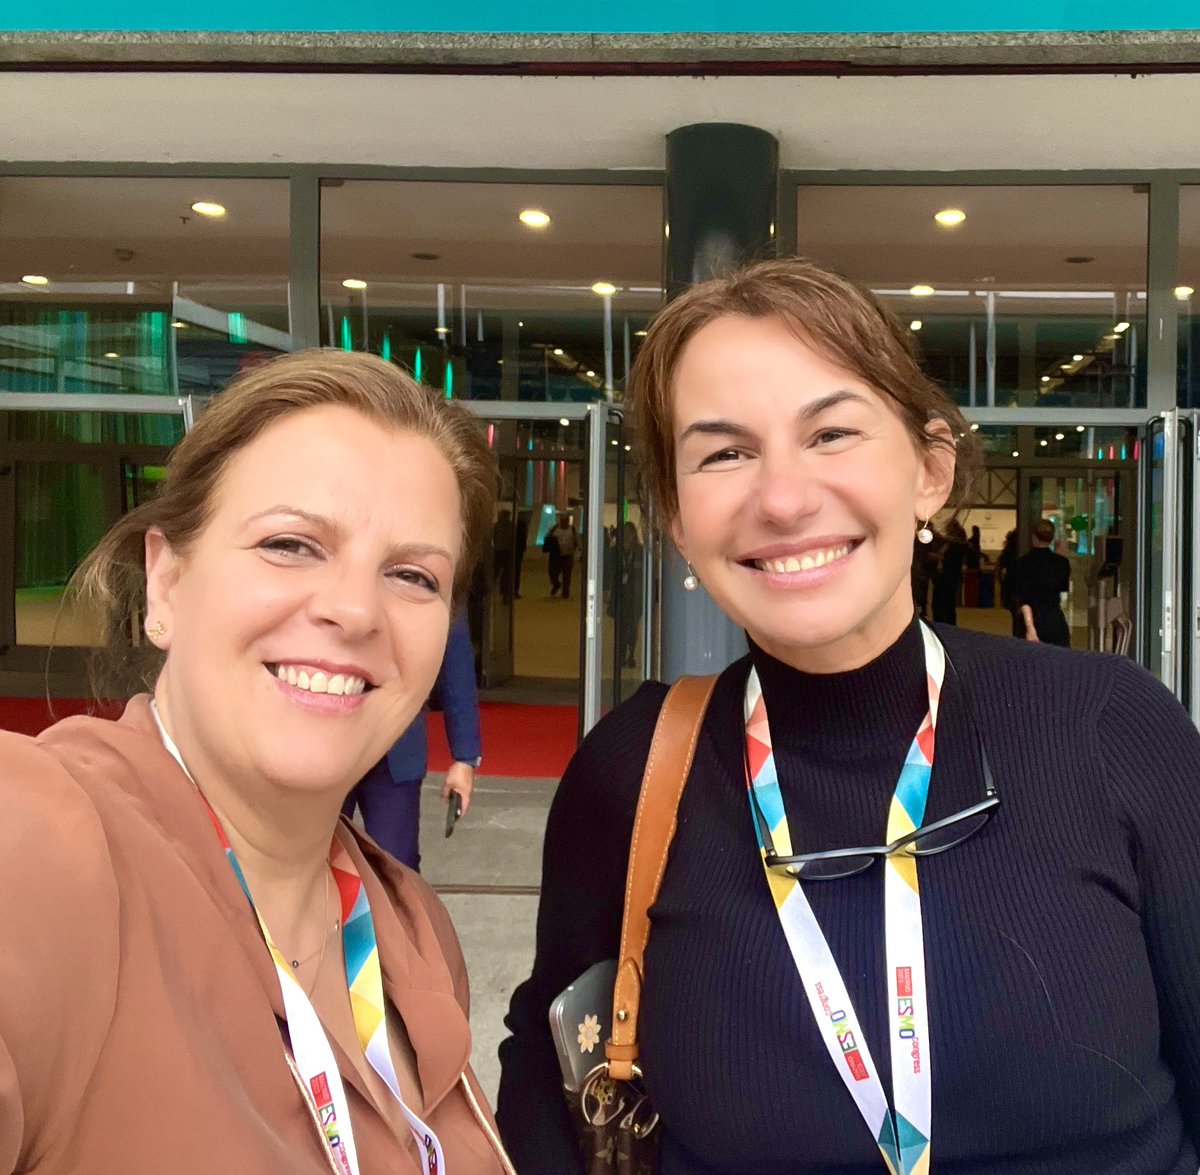 Spending quality time in between science at #ESMO2023 with italian friends: @PrelajArsela beautiful collaboration & friendship built up through #I3Lung & my longstanding YOC buddy, dearest friend over years & through wonderful projects @marinagarassino lovely to see you again❤️